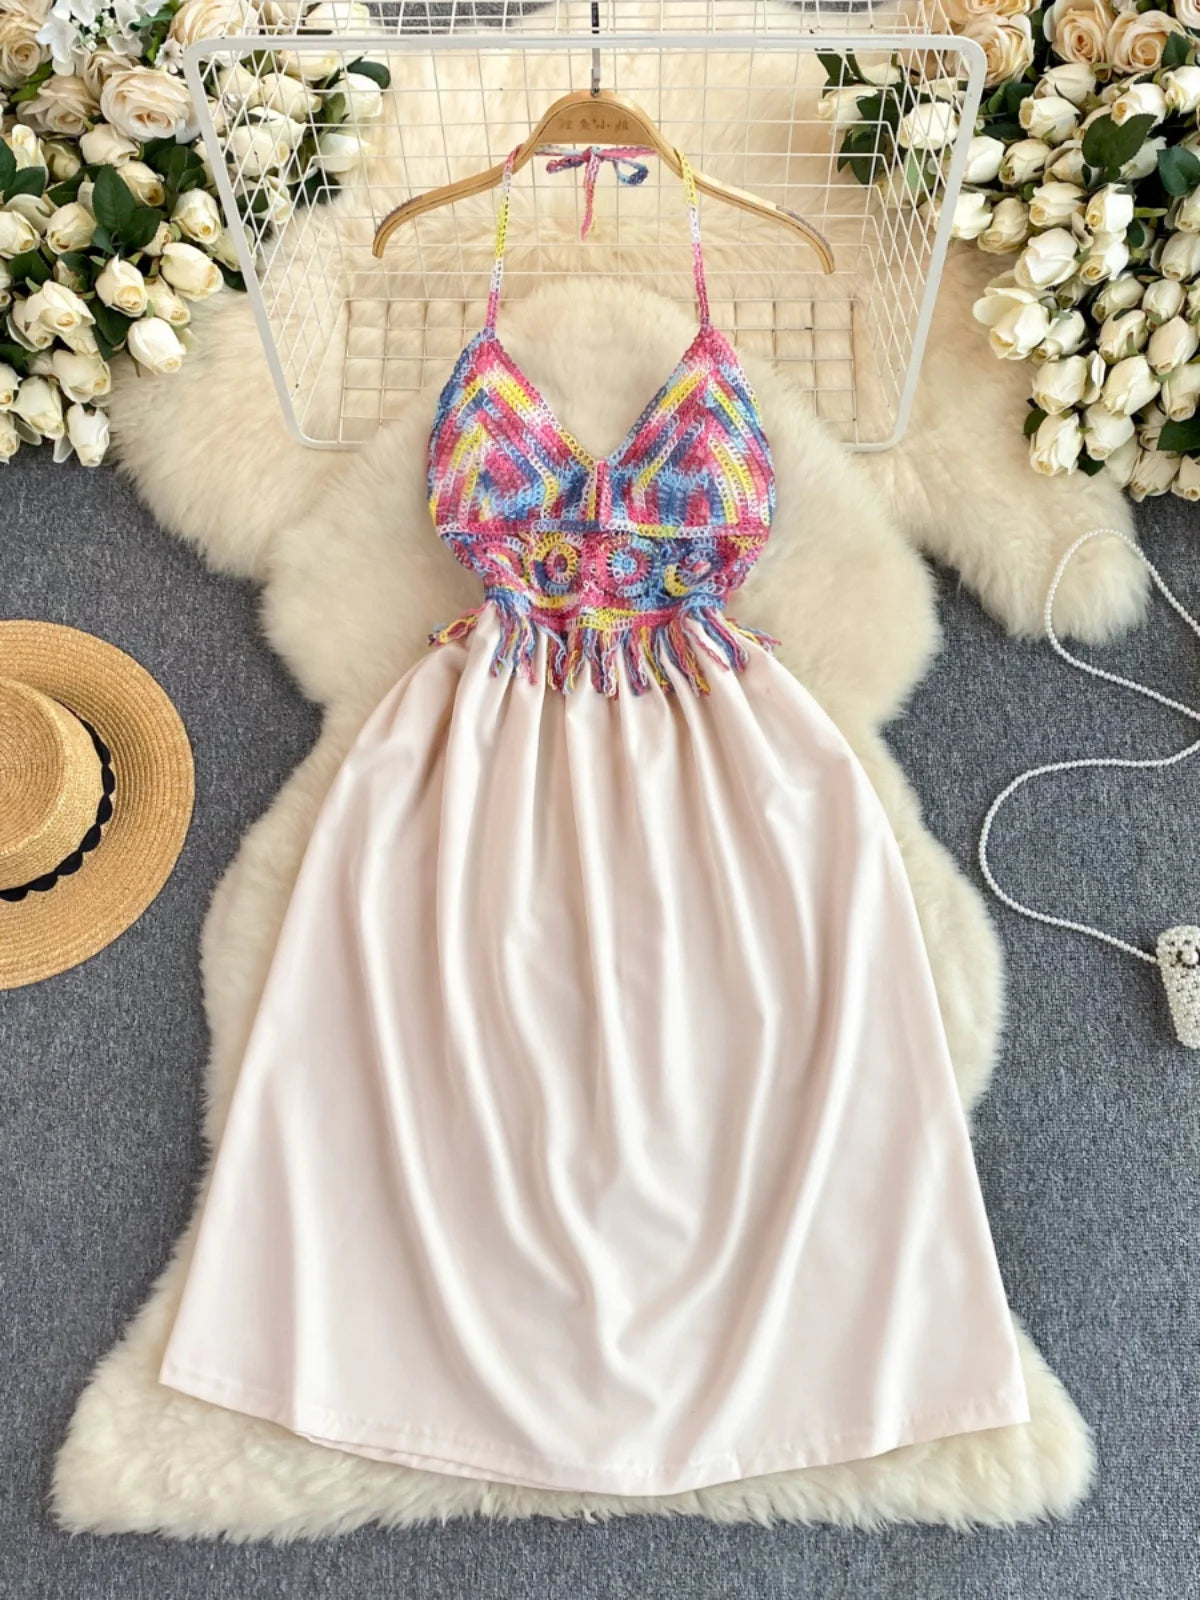 Boho Chic Halter Neck Summer Dress With Colorful Bodice